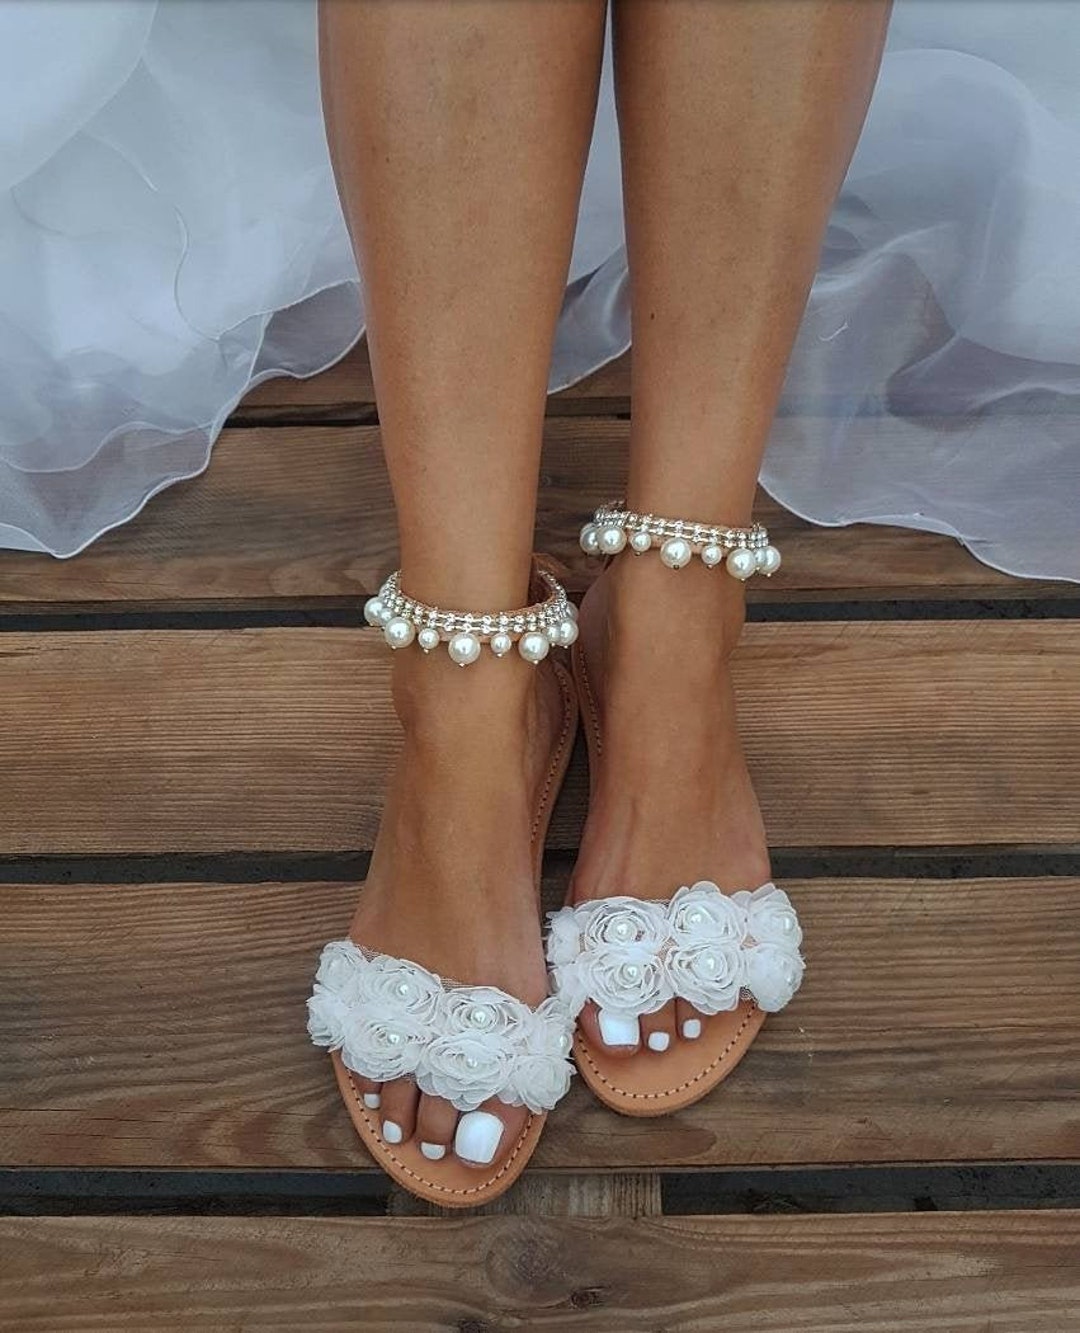 Women & Kids Shoes White Satin Flats With Pearls Ankle Strap Wedding Shoes,  Bridal Shoes, Flower Girl Shoes, Baptism Shoes, Bridal Flats - Etsy